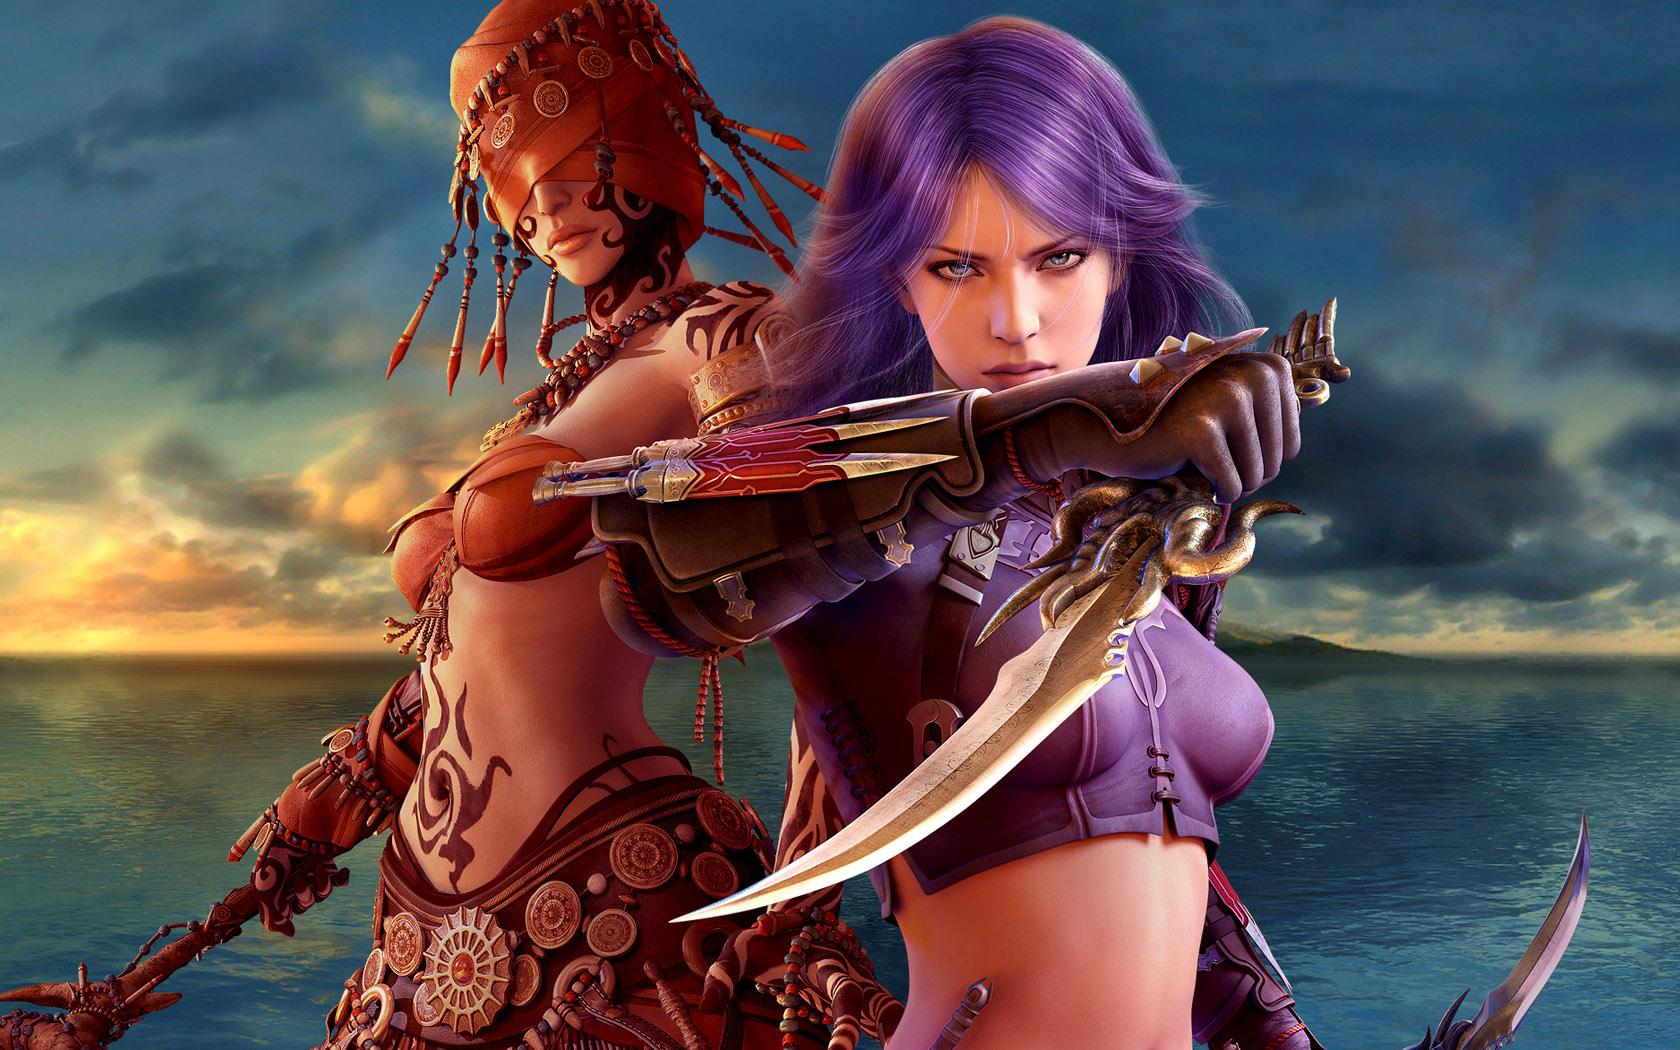 Related Pictures Warrior Women Wallpaper 3d Fantasy Fiction